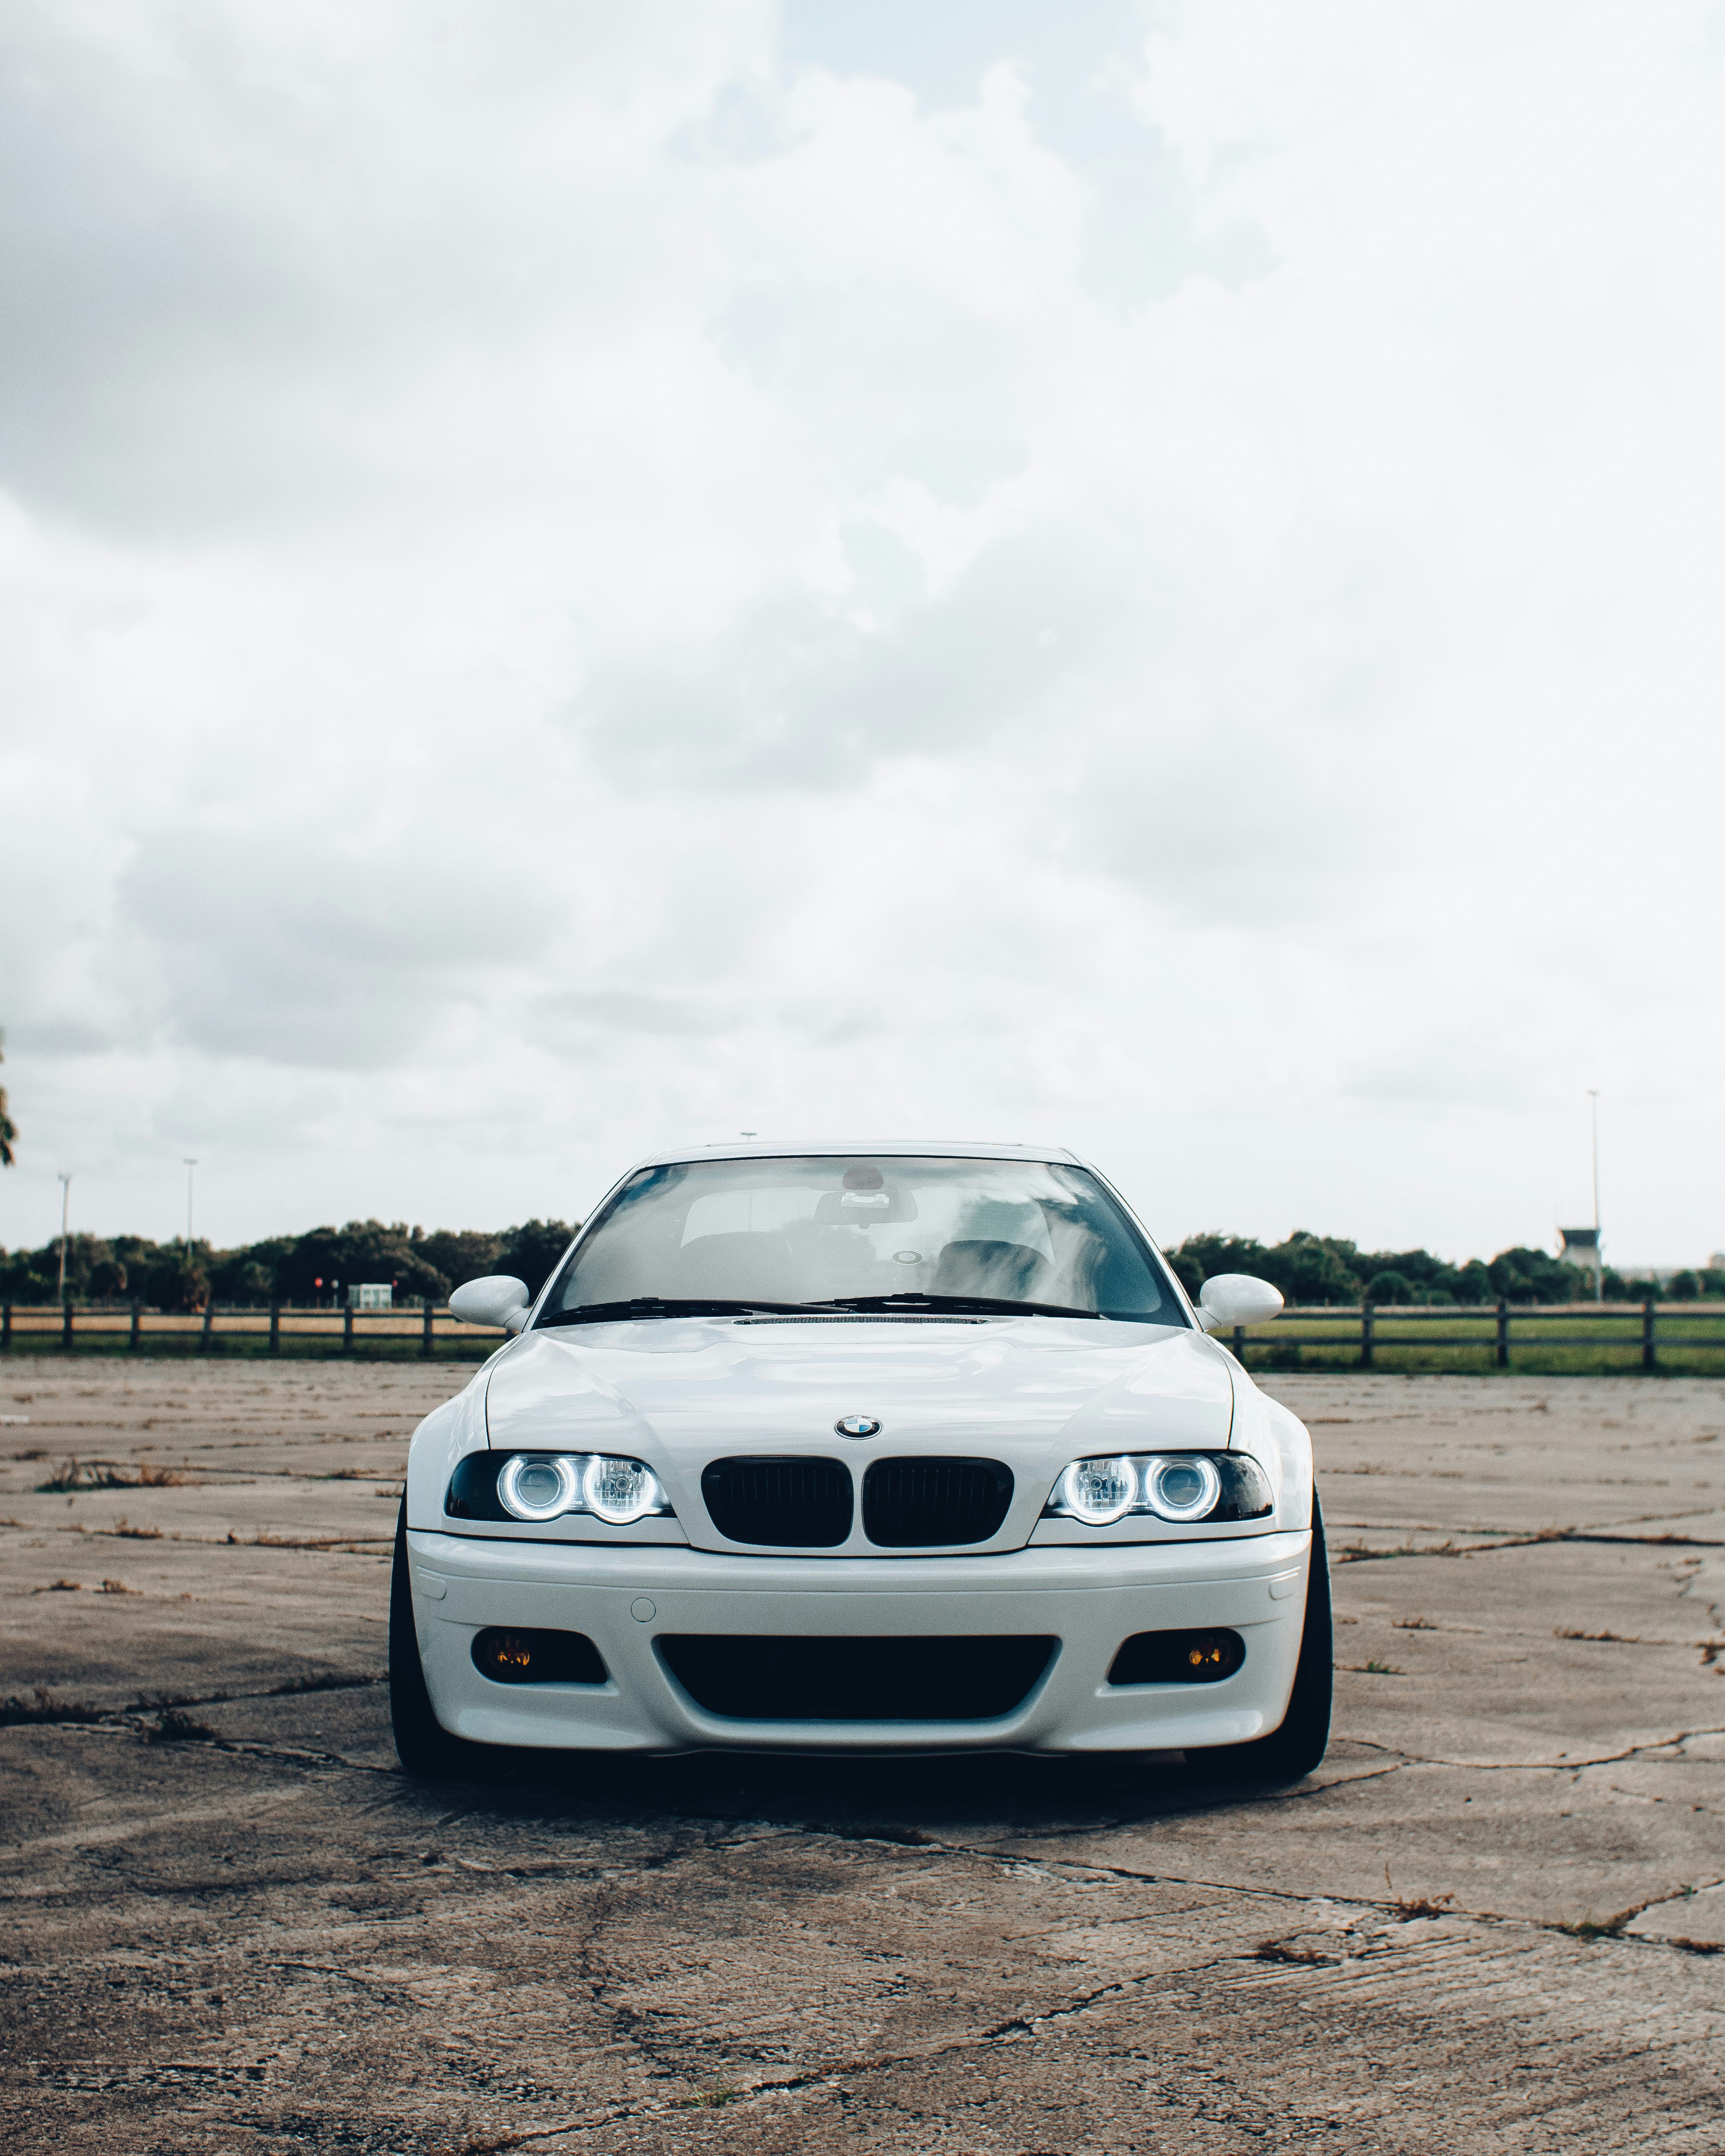 white bmw car on brown field under white cloudy sky during daytime